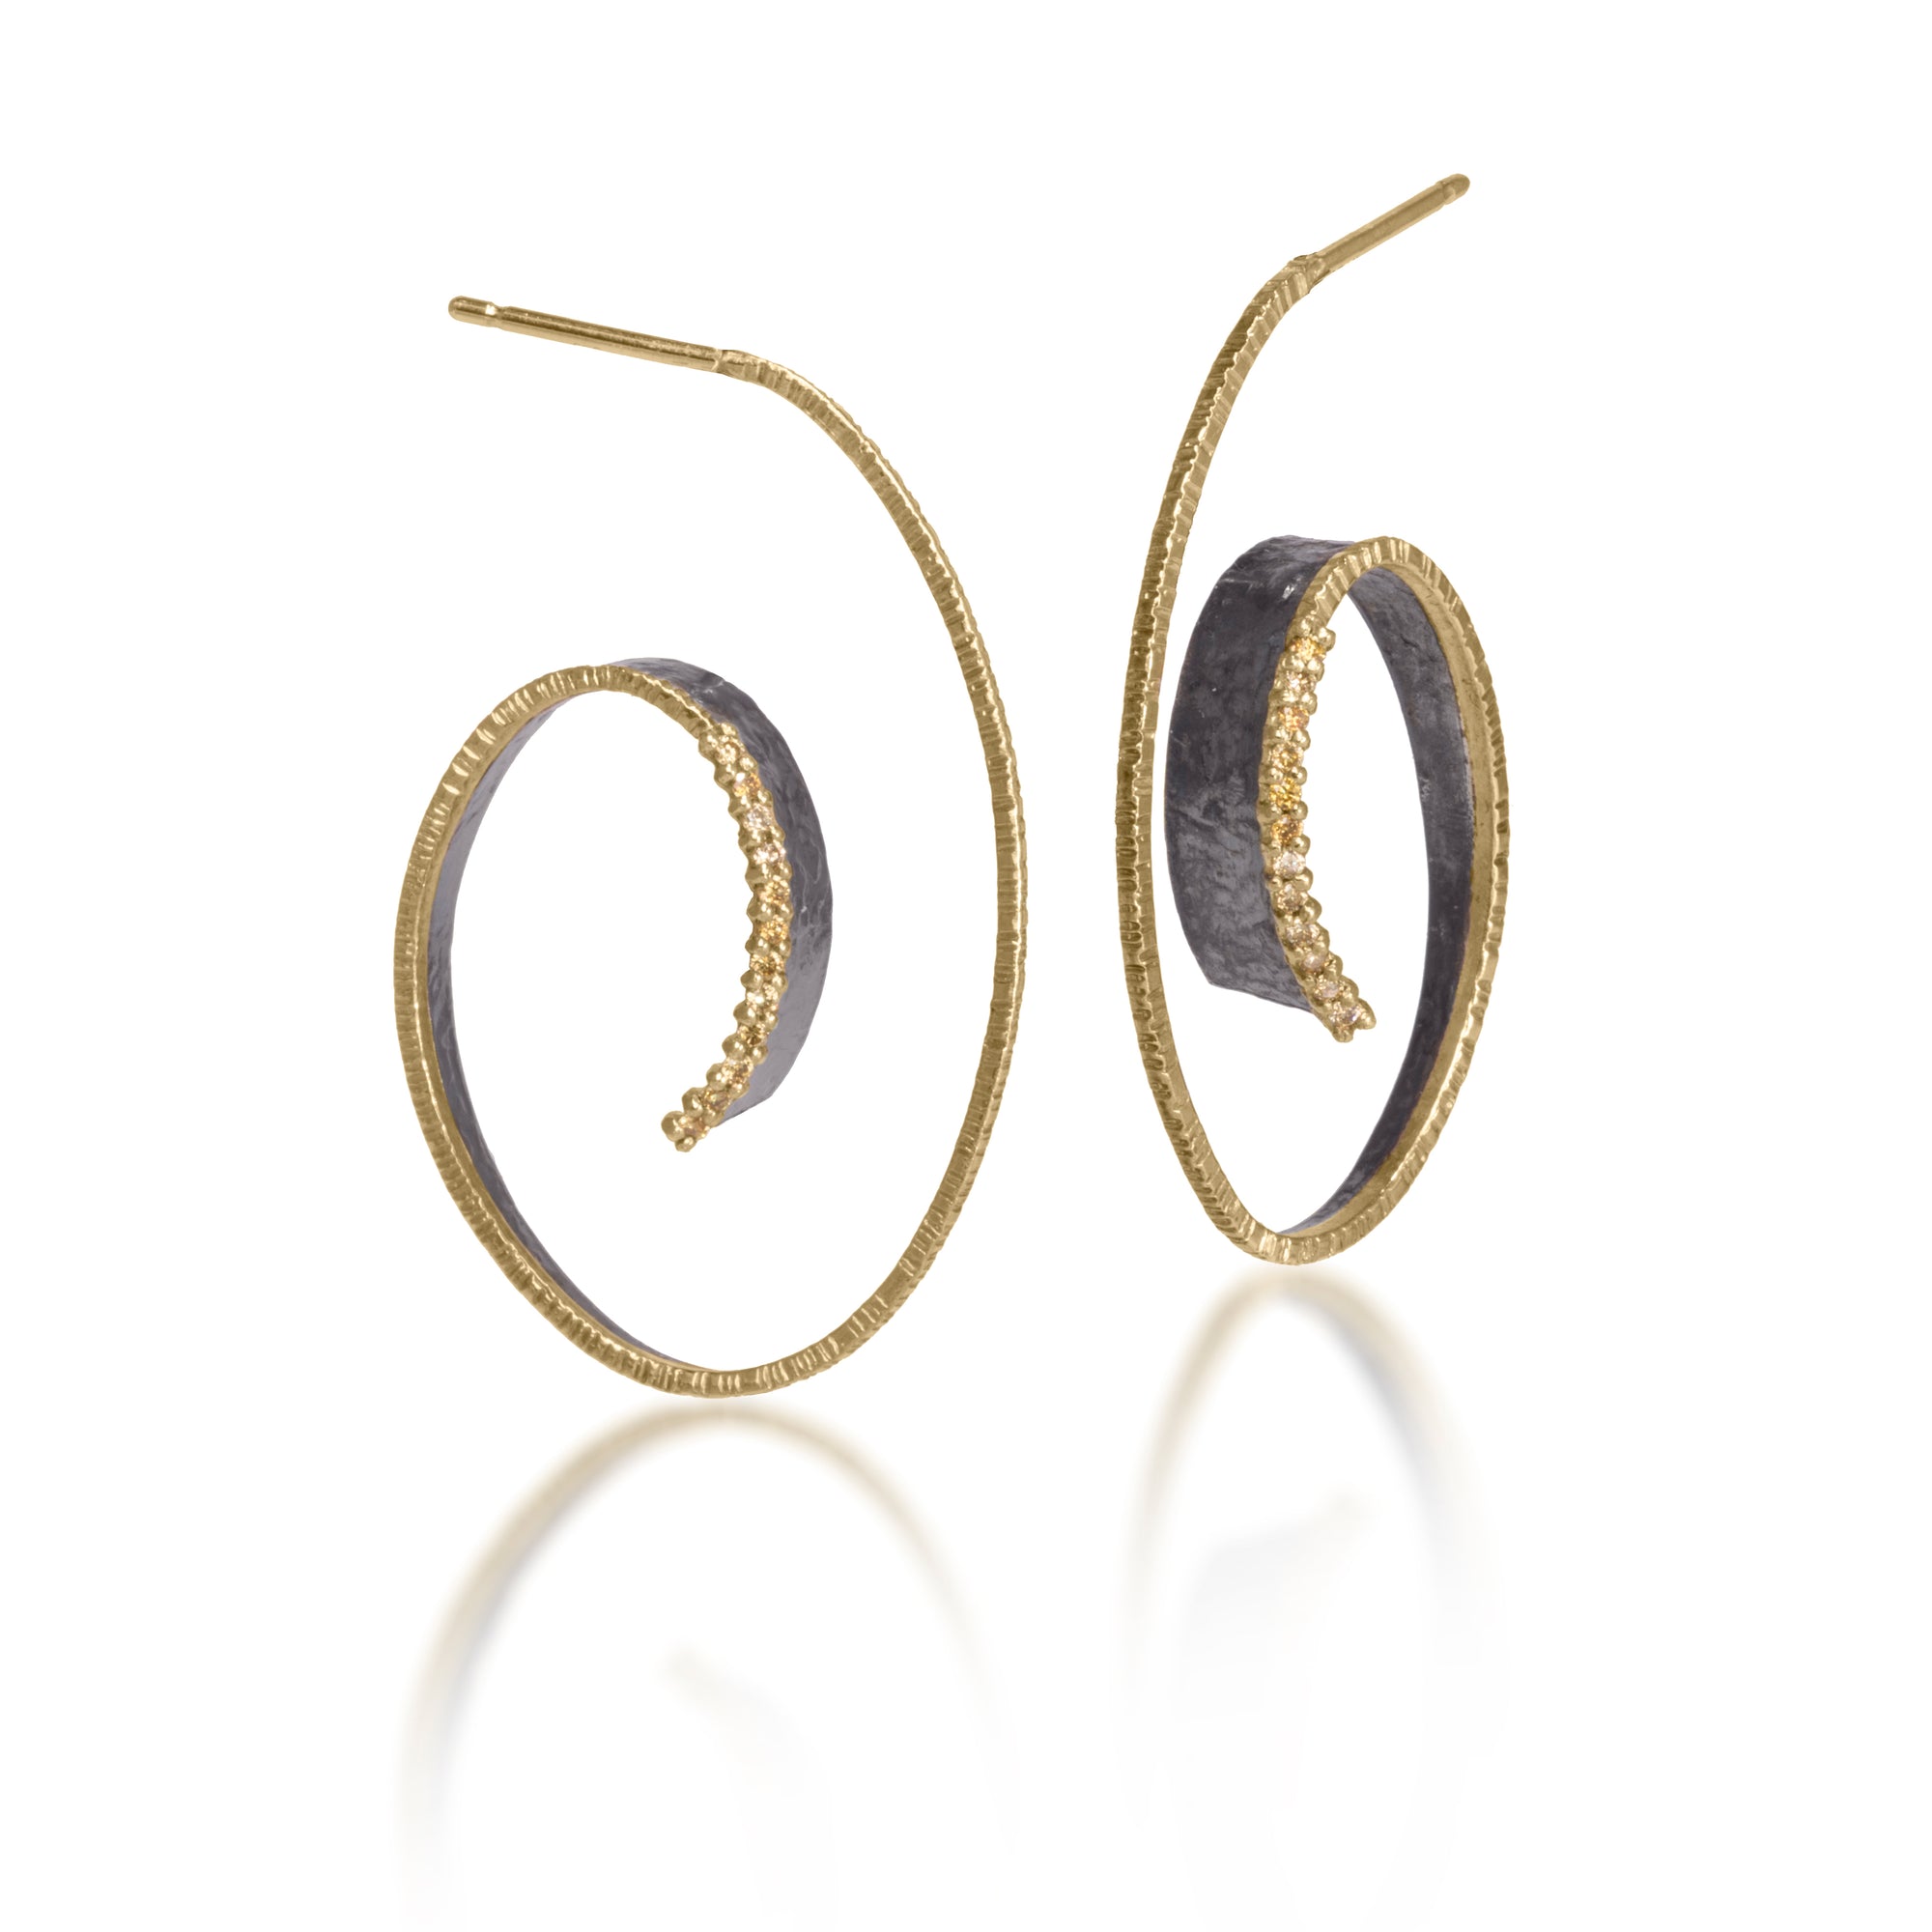 This best-selling Cyclone Earring is created in 18k gold and oxidized sterling silver with prong set natural yellow diamonds.   A diamond and textured gold rim brings light and dimension to this dazzling hoop.   Hand fabricated, hammer textured. 0.1728 tcw.